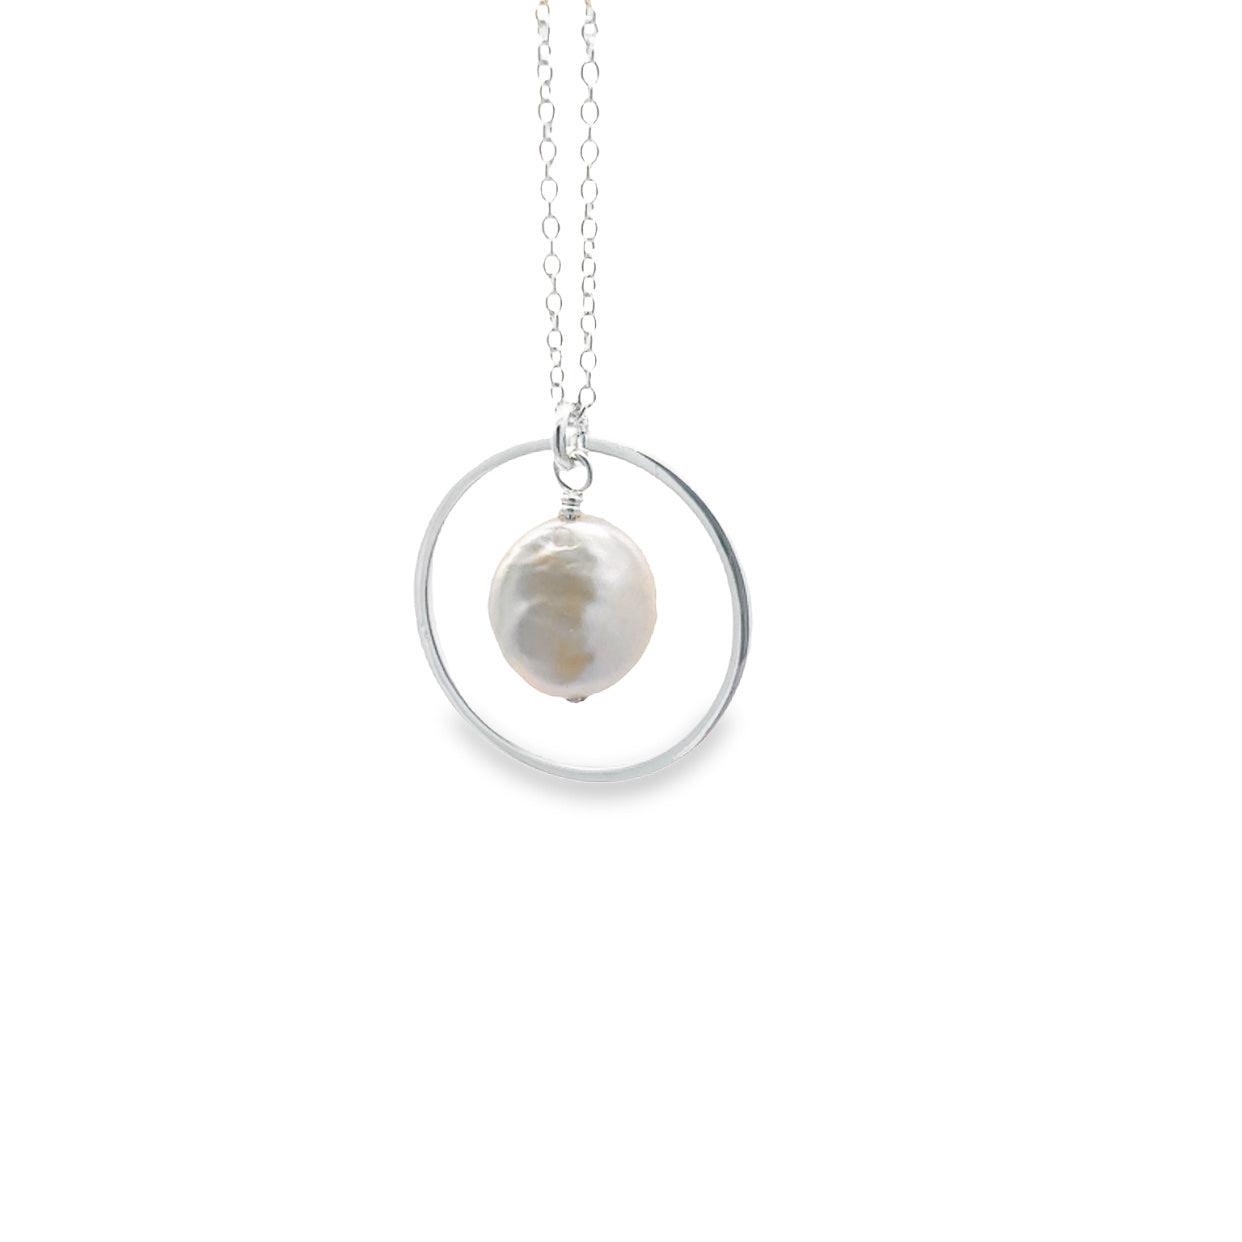 Onatah Sterling Silver Circle With Freshwater Pearl Pendant With Chain 40Cm + 5Cm Extt